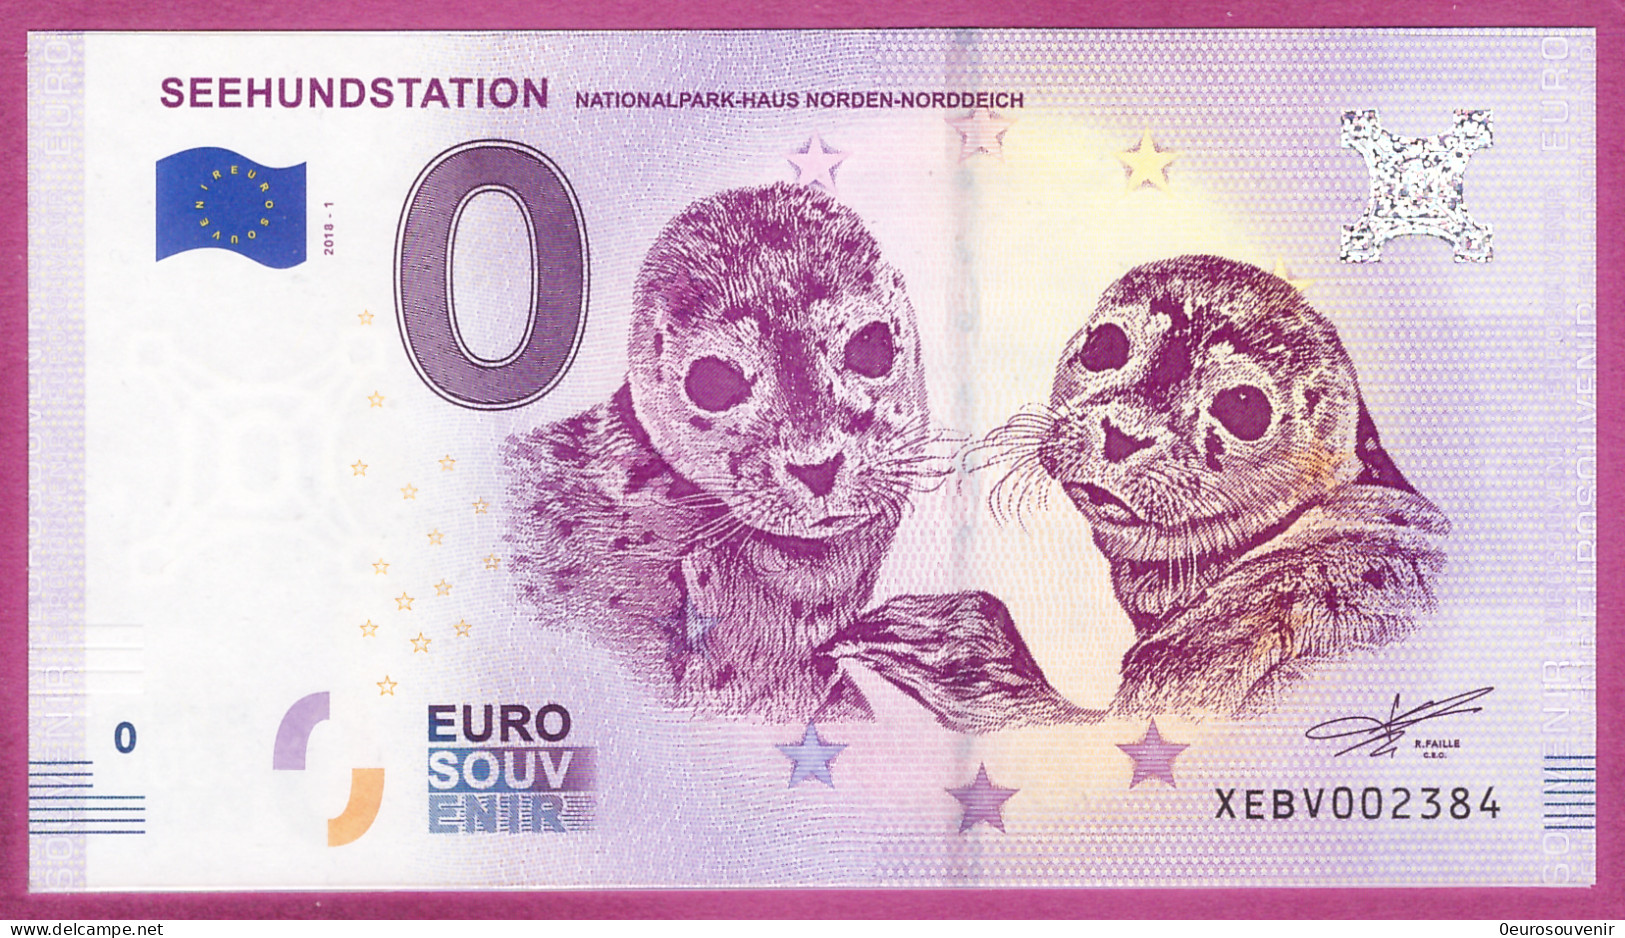 0-Euro XEBV 2018-1 SEEHUNDSTATION NATIONALPARK-HAUS NORDEN-NORDDEICH - Private Proofs / Unofficial